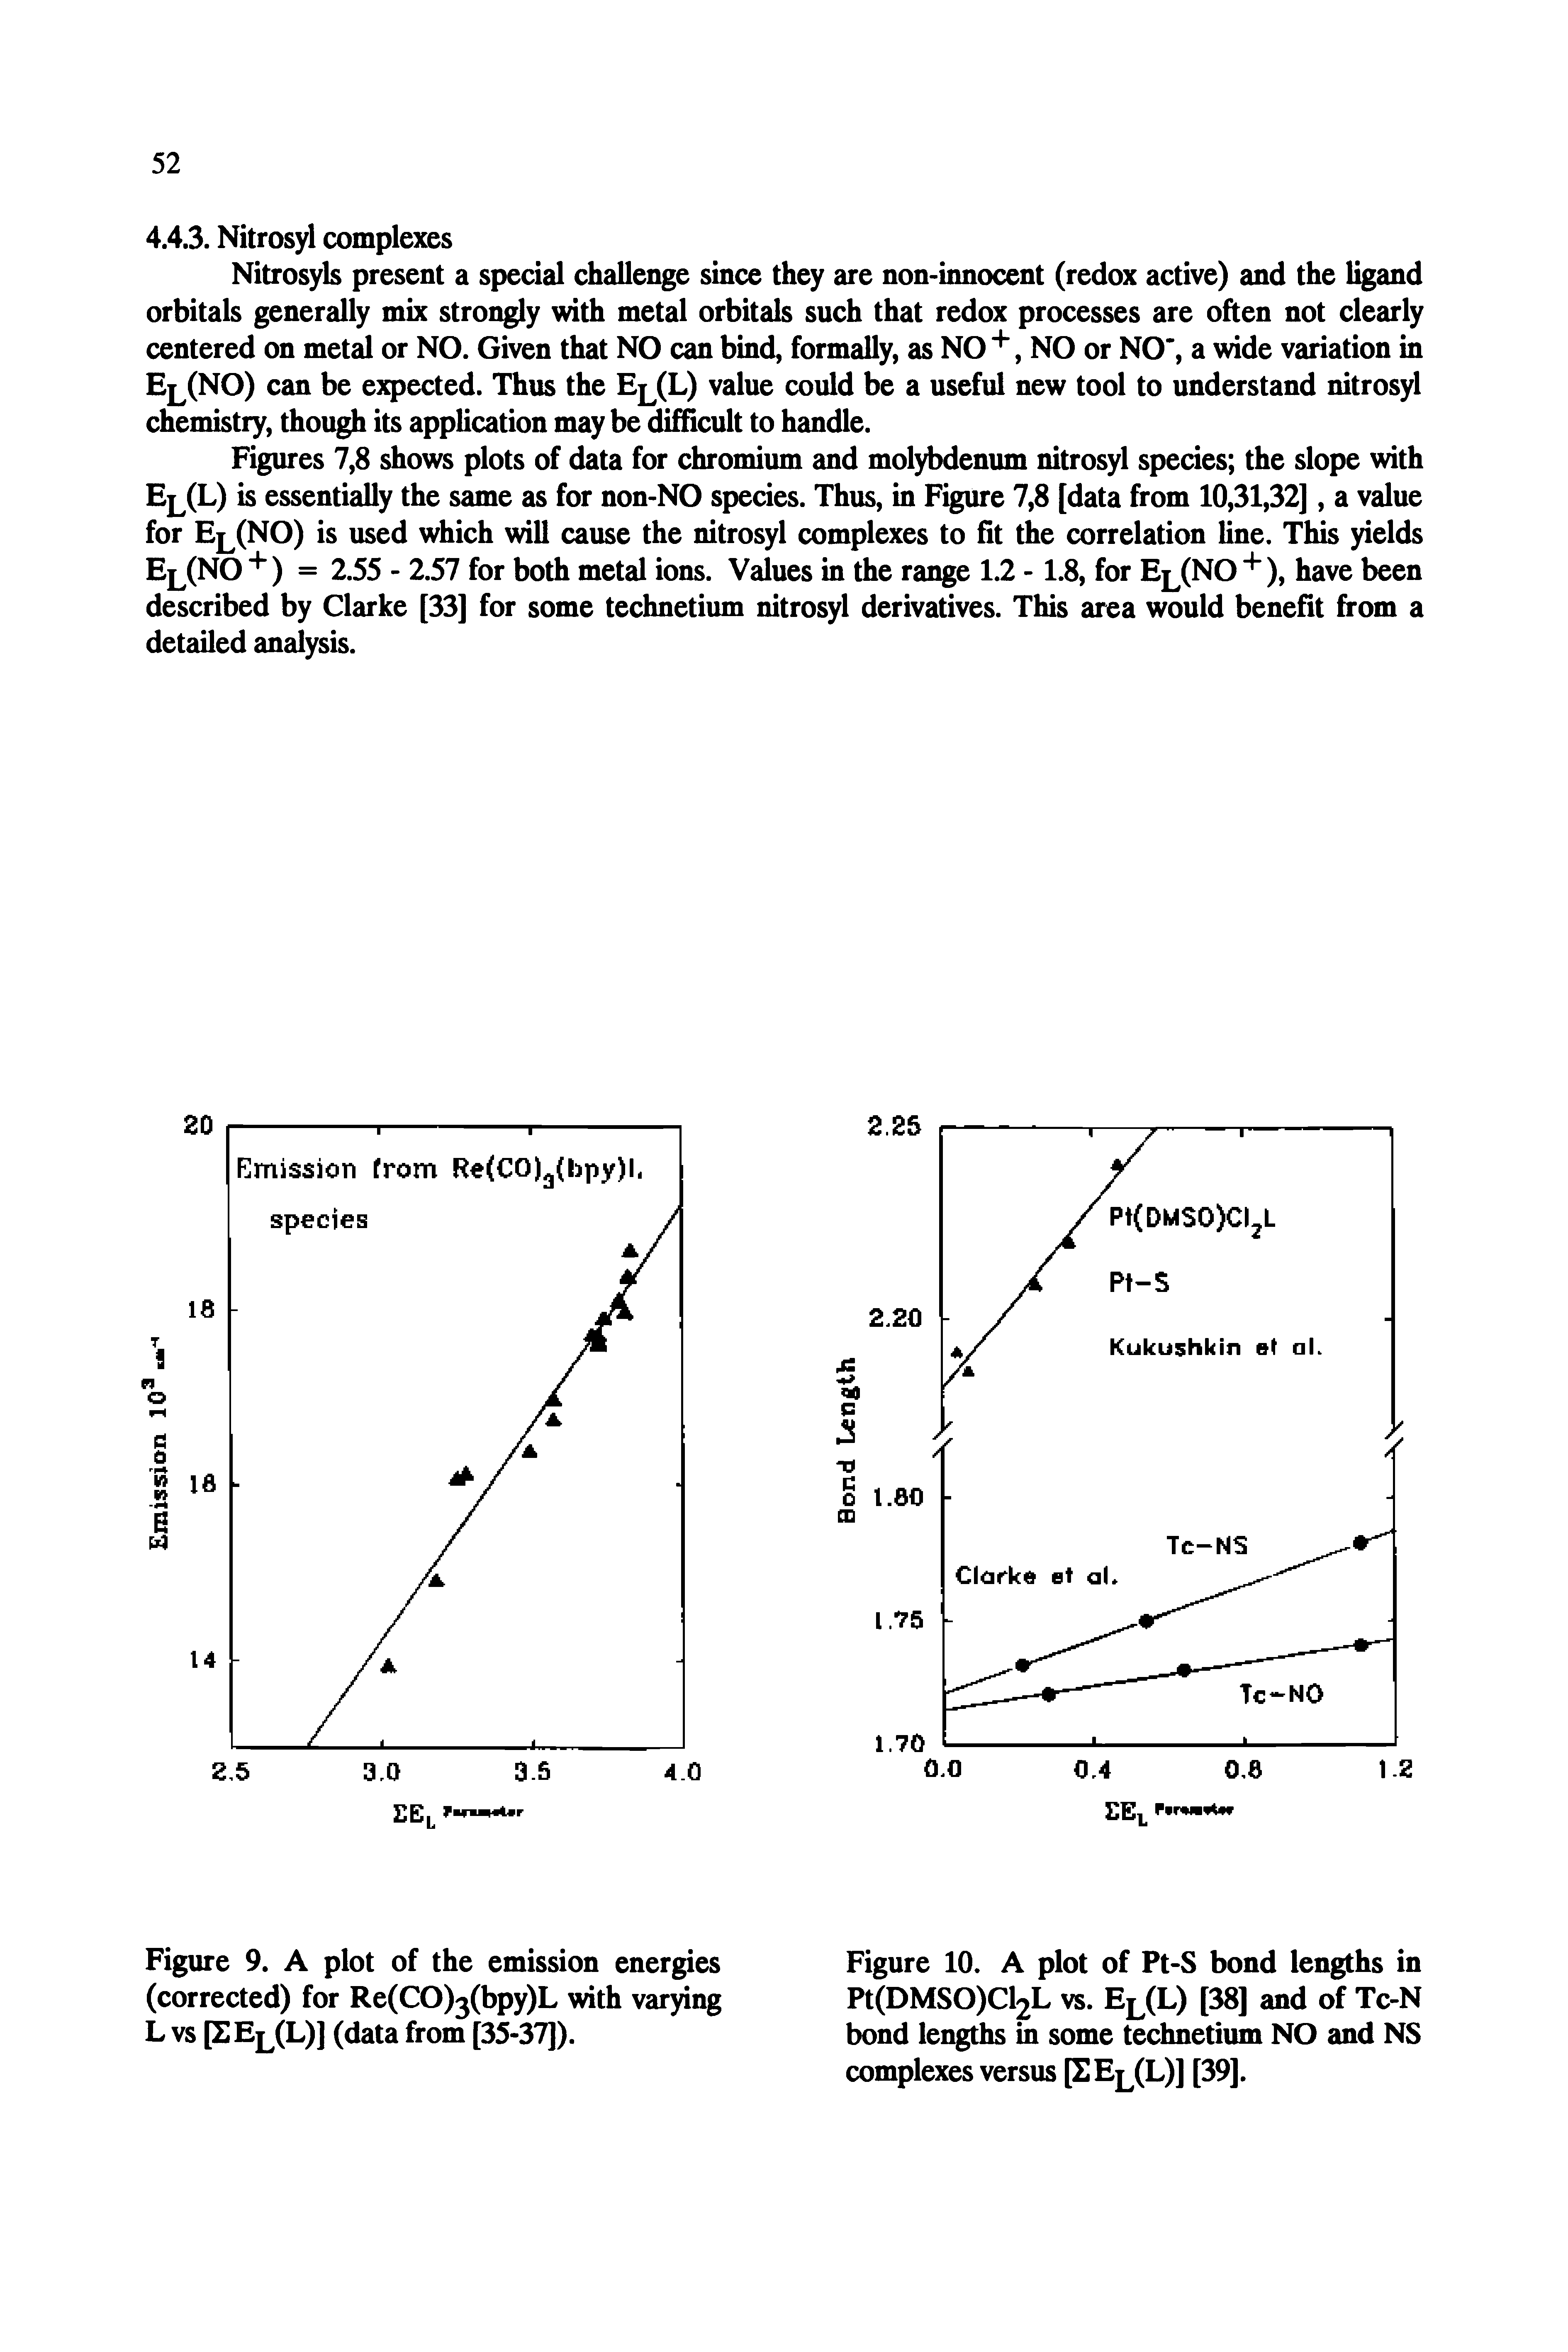 Figures 7,8 shows plots of data for chromium and molybdenum nitrosyl species the slope with El(L) is essentially the same as for non-NO species. Thus, in Figure 7,8 [data from 10,31,32], a value for El(NO) is used which will cause the nitrosyl complexes to fit the correlation line. This yields El(NO + ) = 2.55 - 2.57 for both metal ions. Values in the range 1.2 -1.8, for El(NO" "), have been described by Clarke [33] for some technetium nitrosyl derivatives. This area would benefit from a detailed analysis.